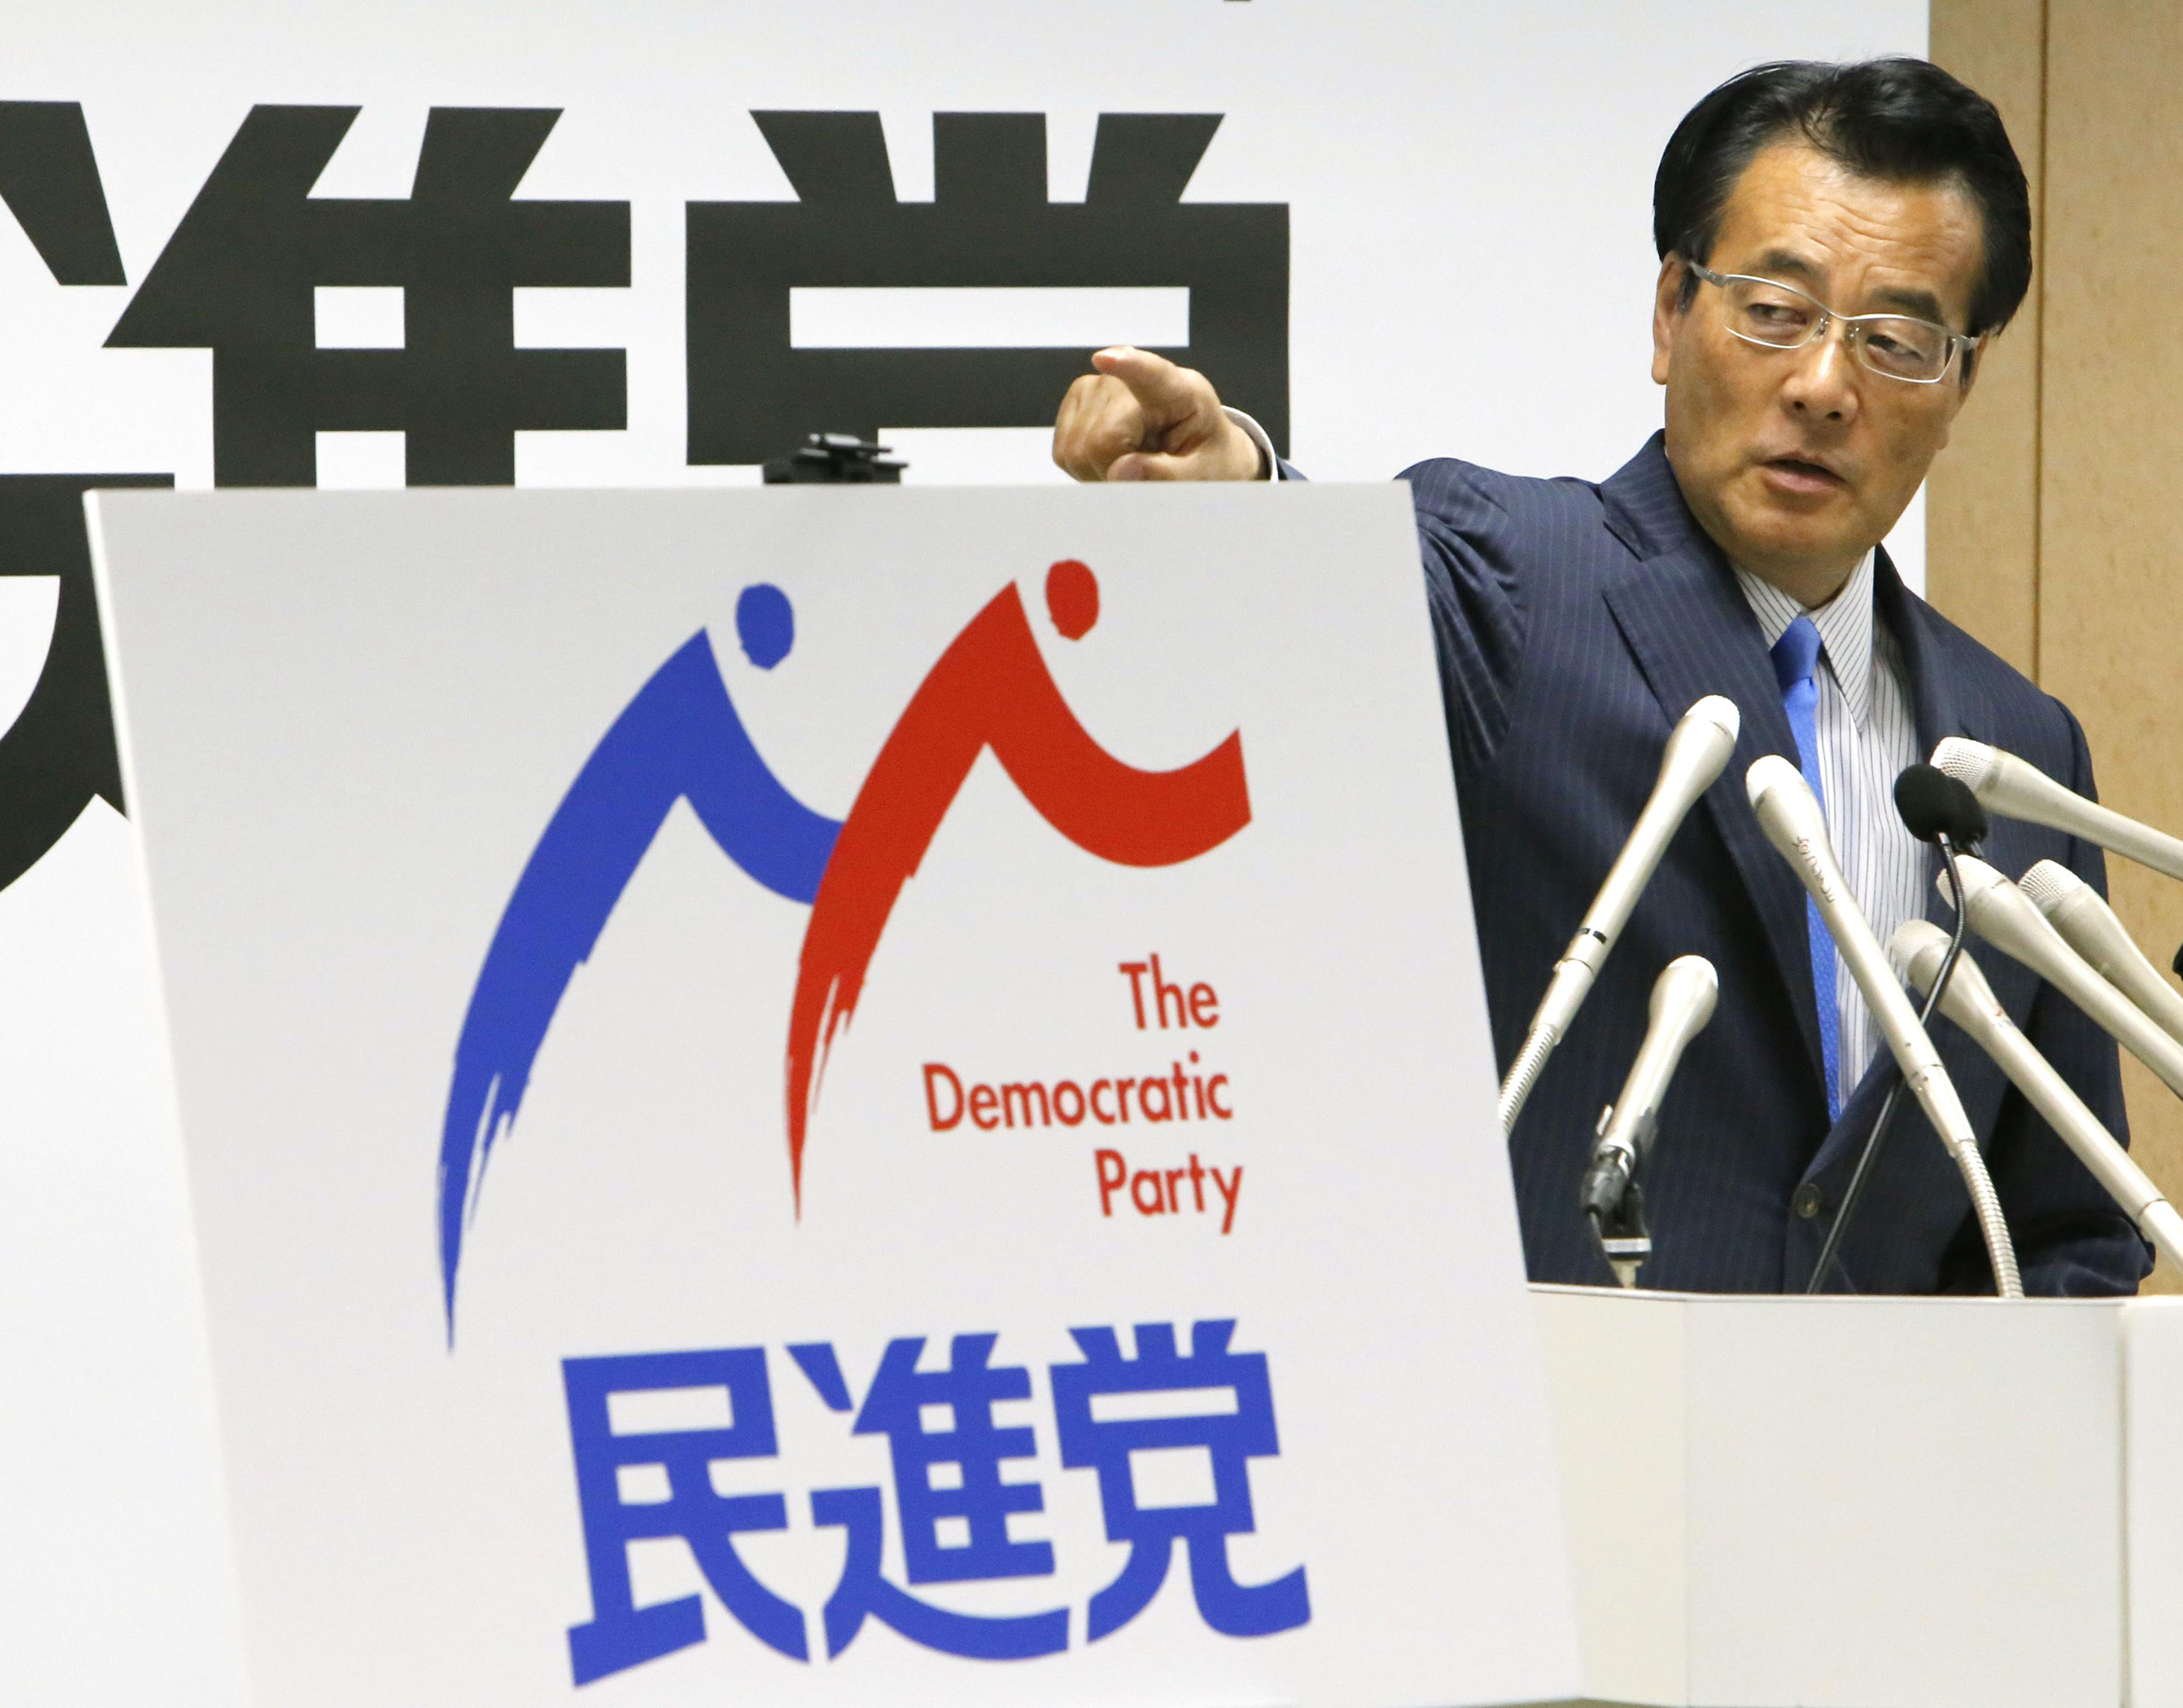 Katsuya Okada, leader of the main opposition Democratic Party, unveils the party's logo at a press conference in Tokyo on May 19, 2016. (Kyodo/Getty Images)